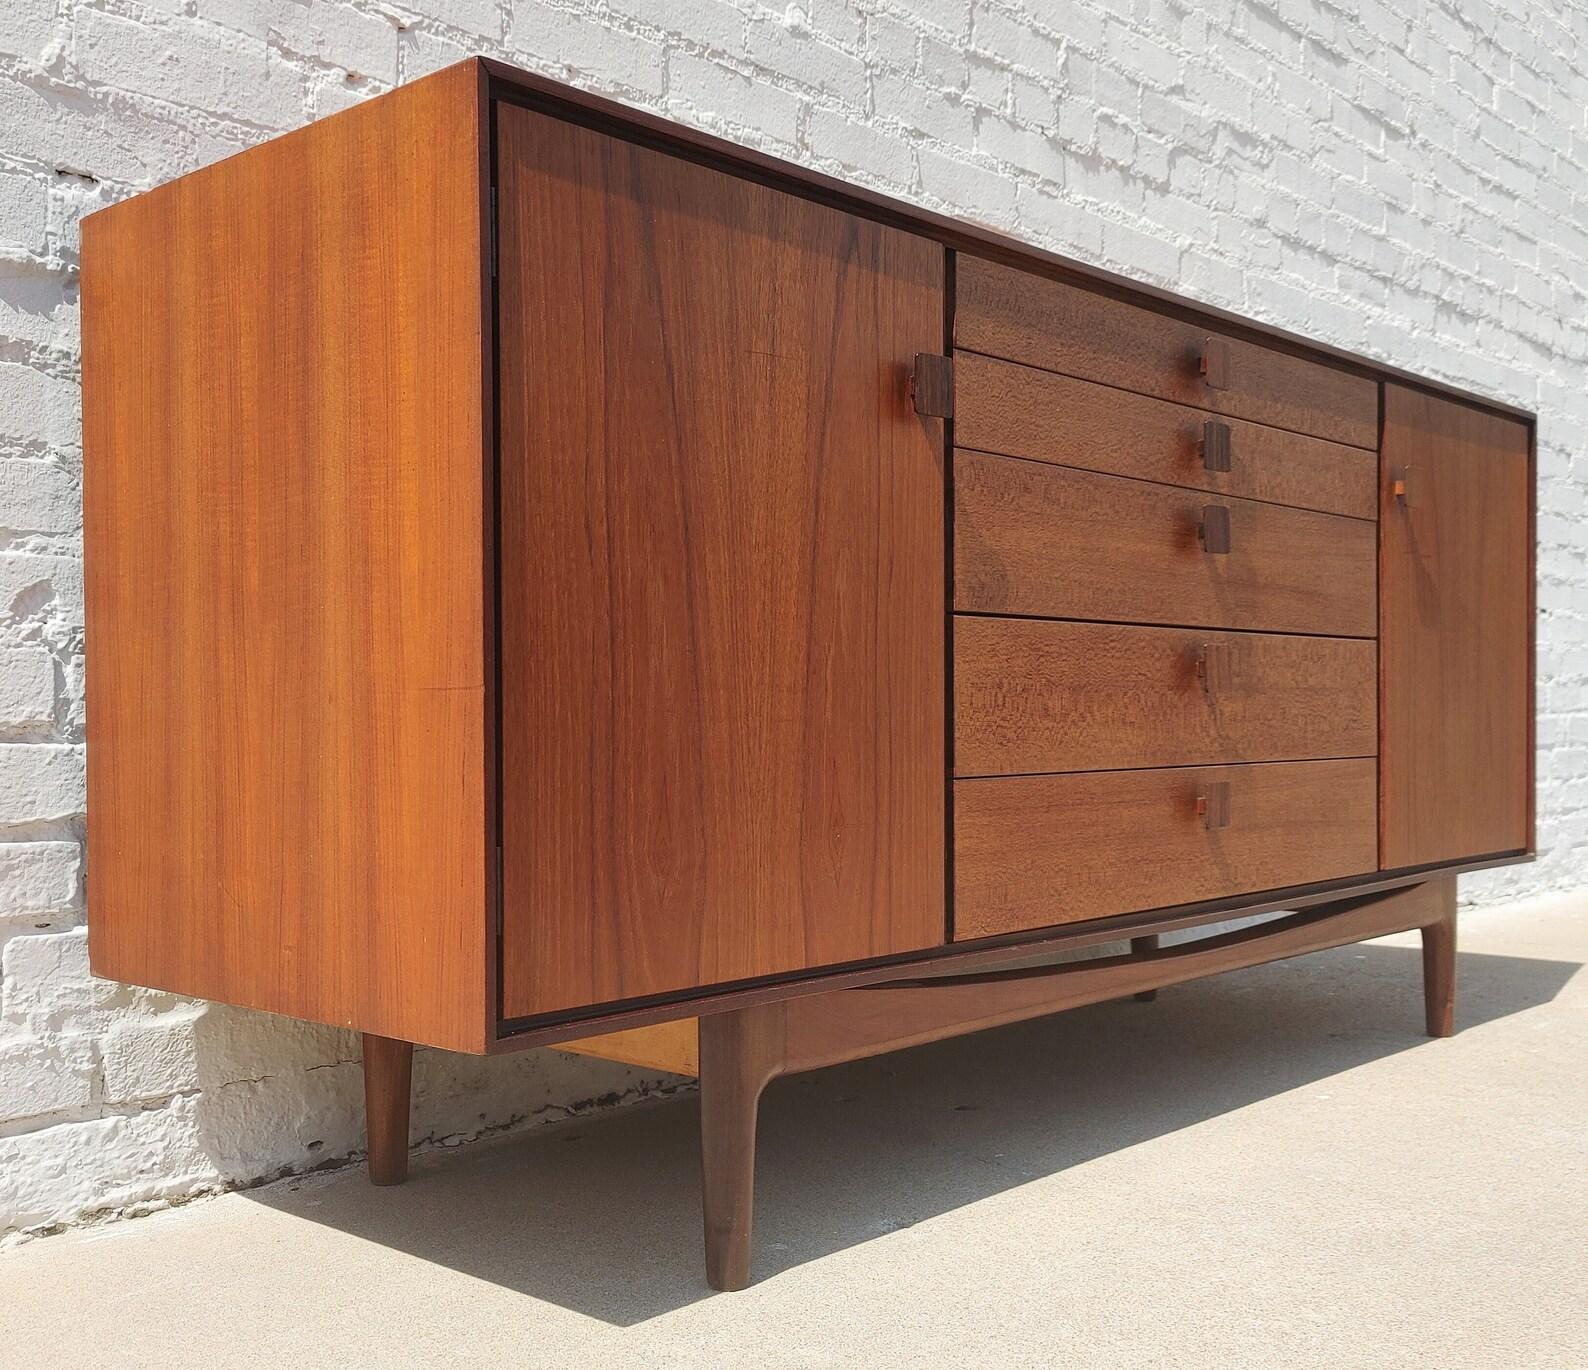 Mid Century Modern Kofod Larsen Teak Sideboard
 
Above average vintage condition and structurally sound. Has some expected slight finish wear and scratching. Top has a couple light discolorations. Outdoor listing pictures might appear slightly